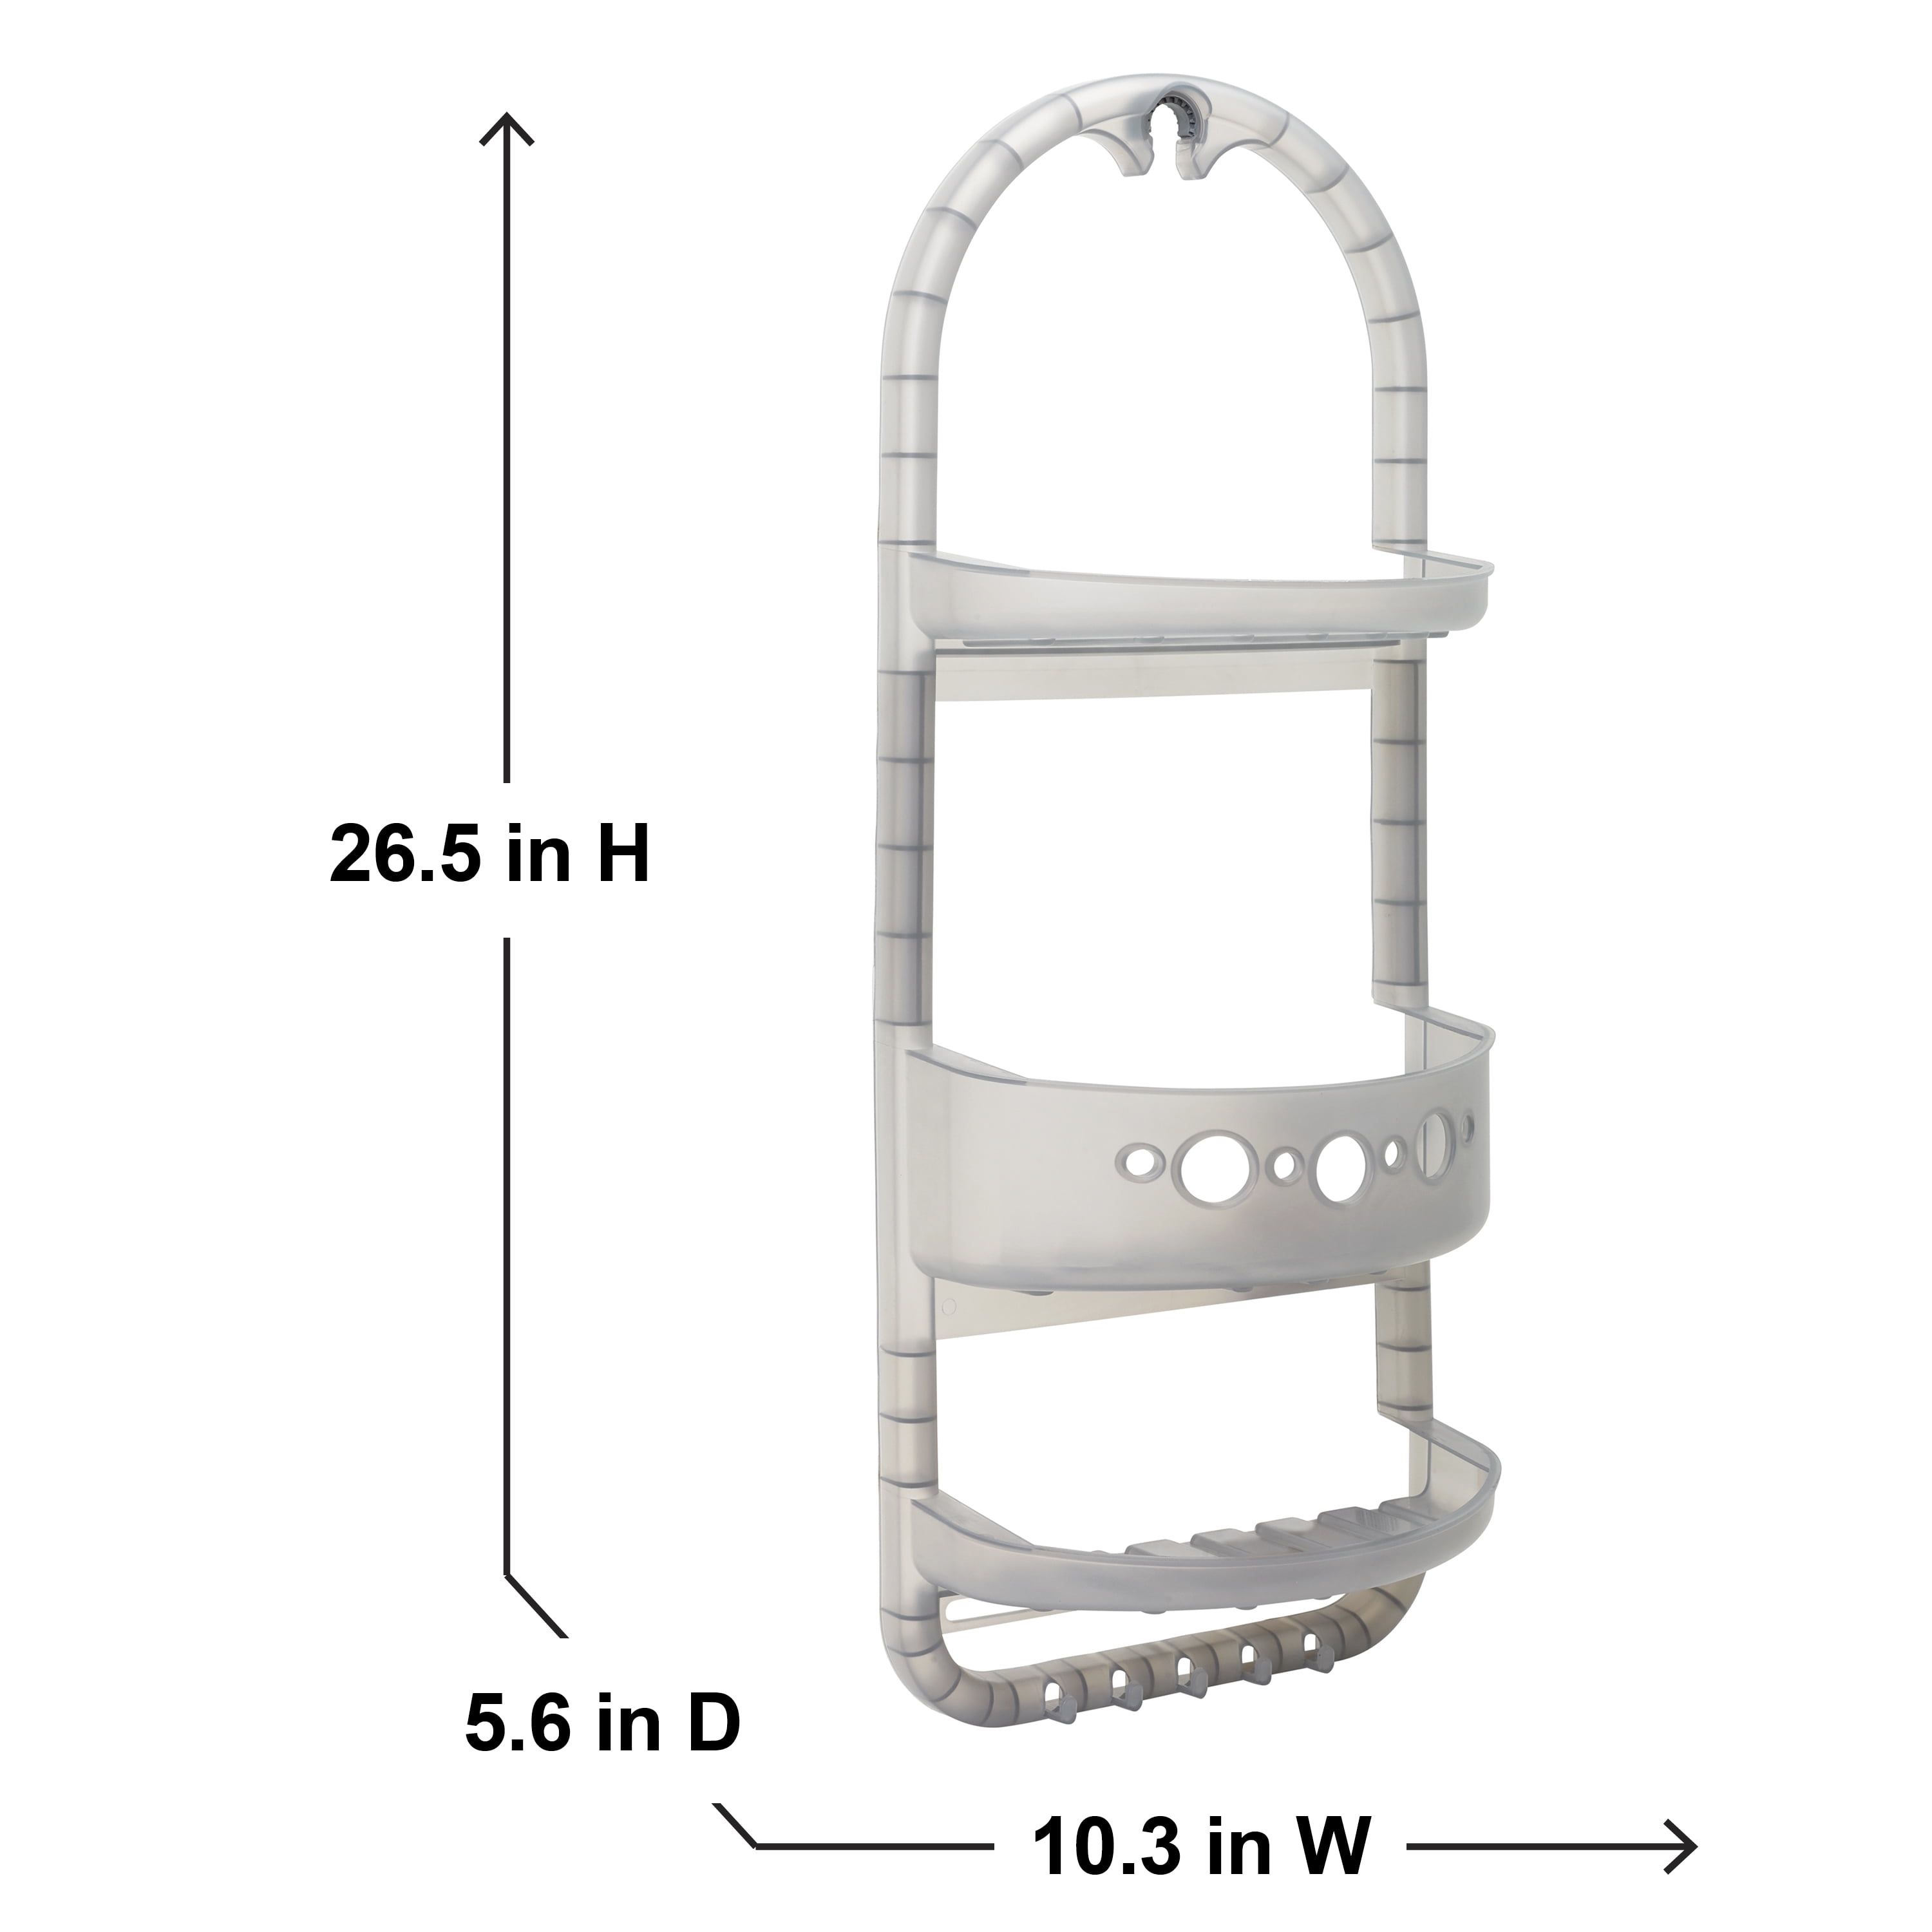 JiatuA Grey Portable Shower Caddy with 3 Compartments, Plastic, 12.4 in L x  8.9 in W x 7.4 in H, with Handle for Easy Carrying and Organization